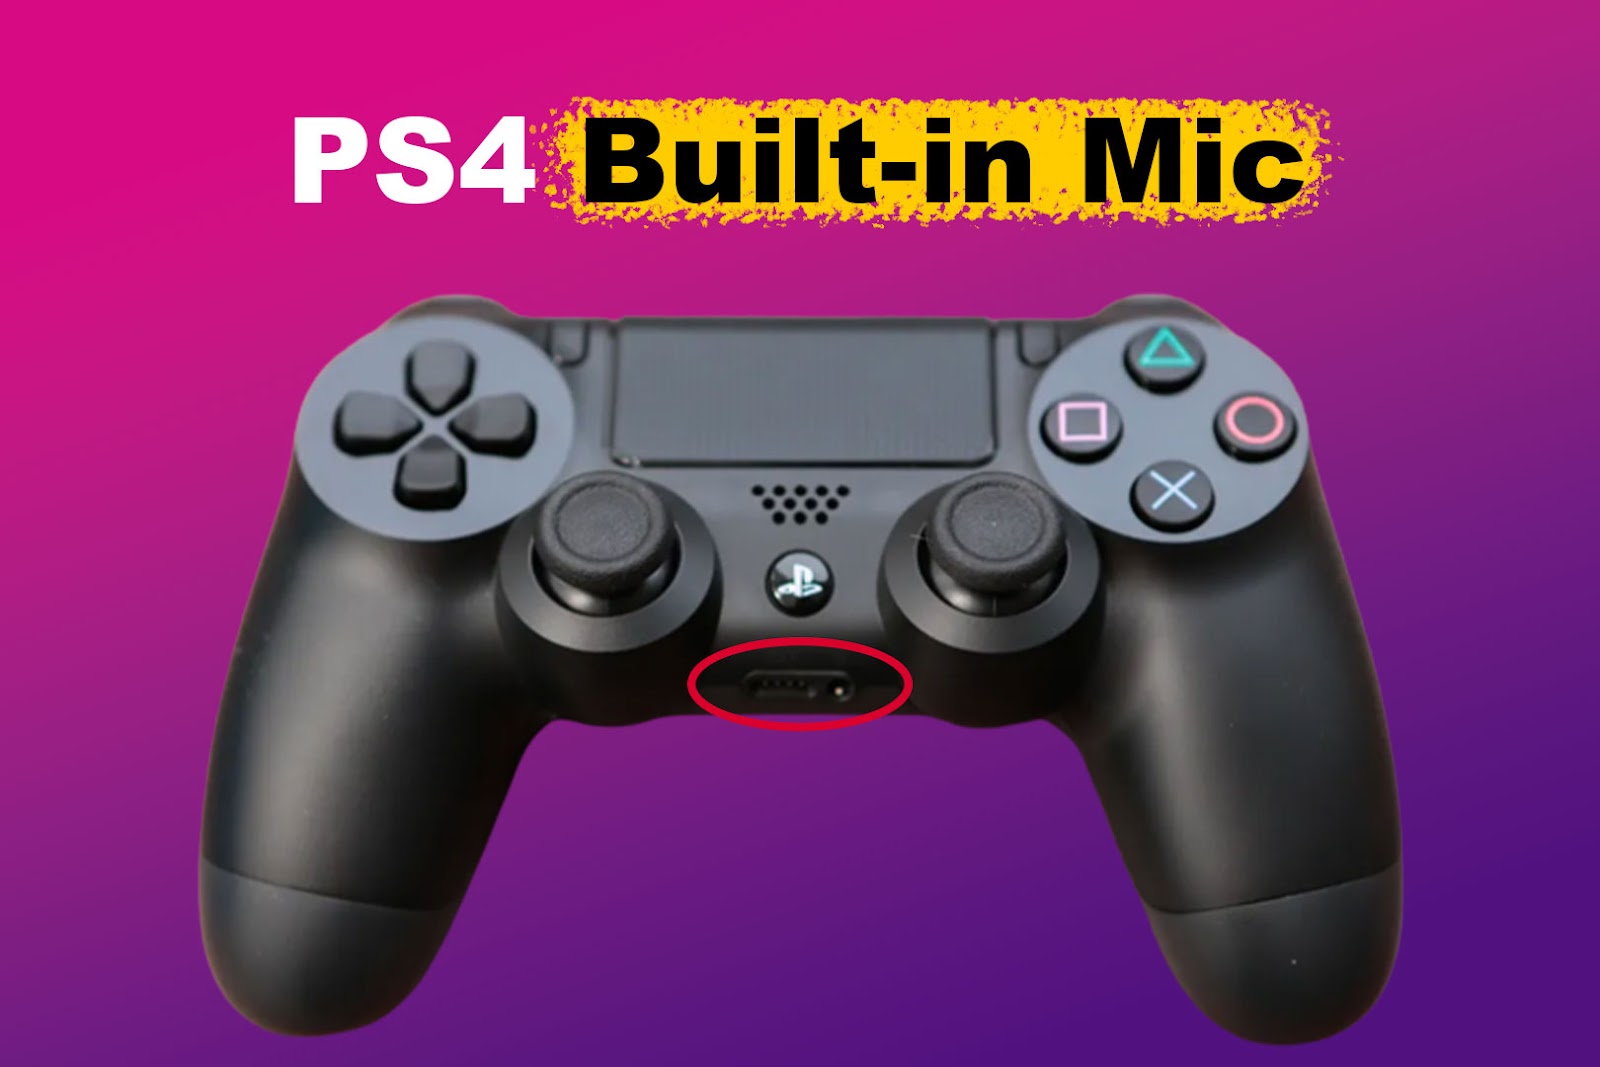 Does the PS4 Have a Built-In Mic? [The Truth]